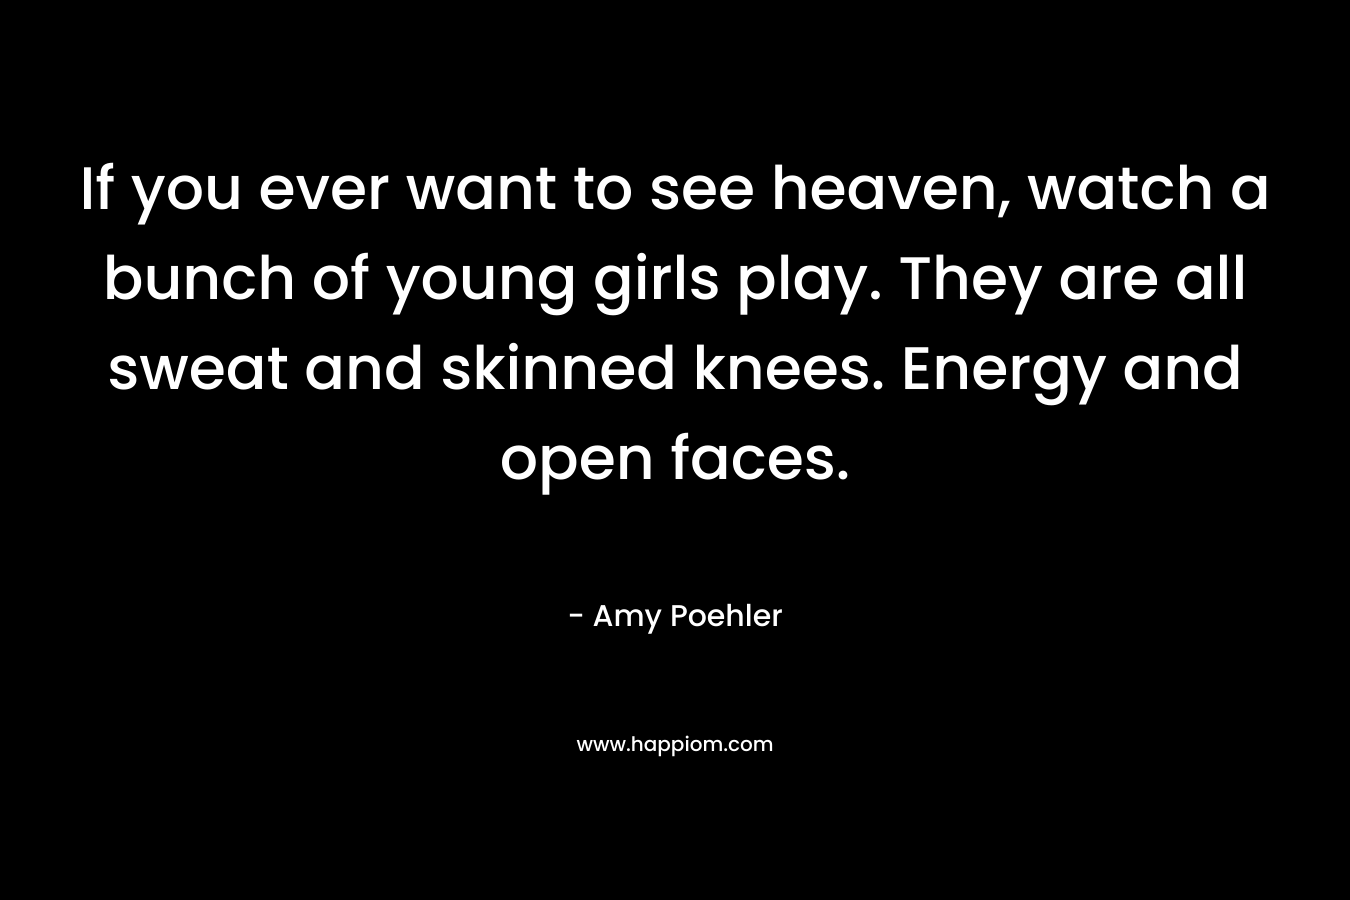 If you ever want to see heaven, watch a bunch of young girls play. They are all sweat and skinned knees. Energy and open faces. – Amy Poehler